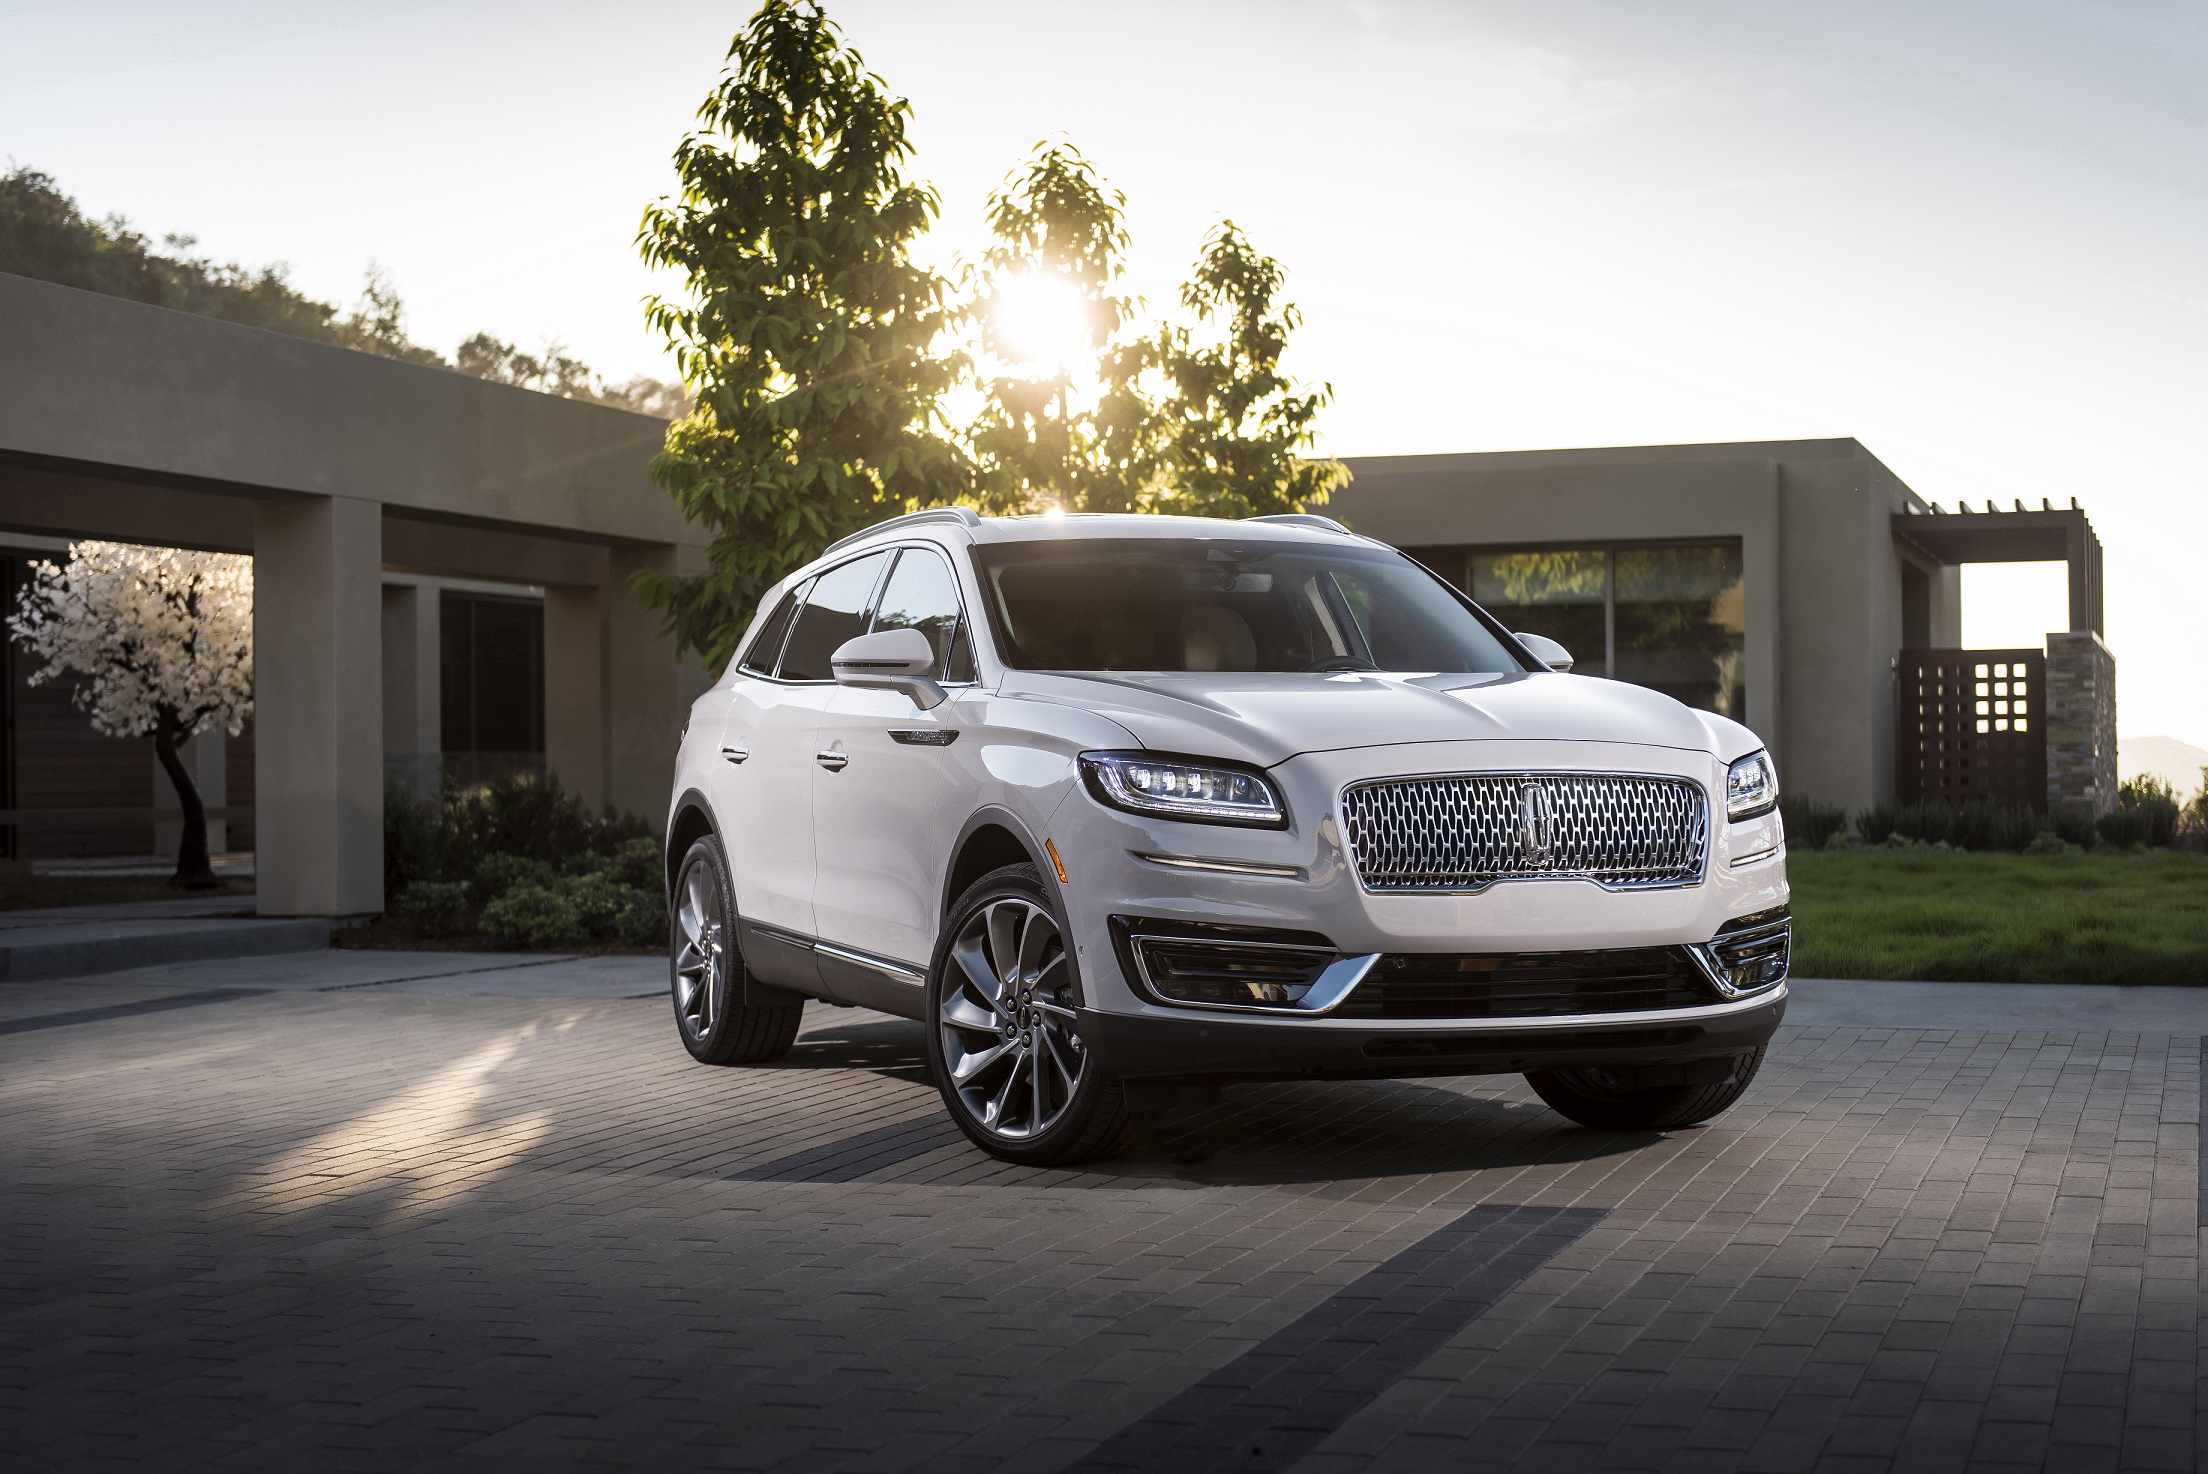 incoln Nautilus, a midsize luxury SUV delivering a powerful turbocharged engine range and a suite of advanced technologies designed to give drivers greater confidence on the road.